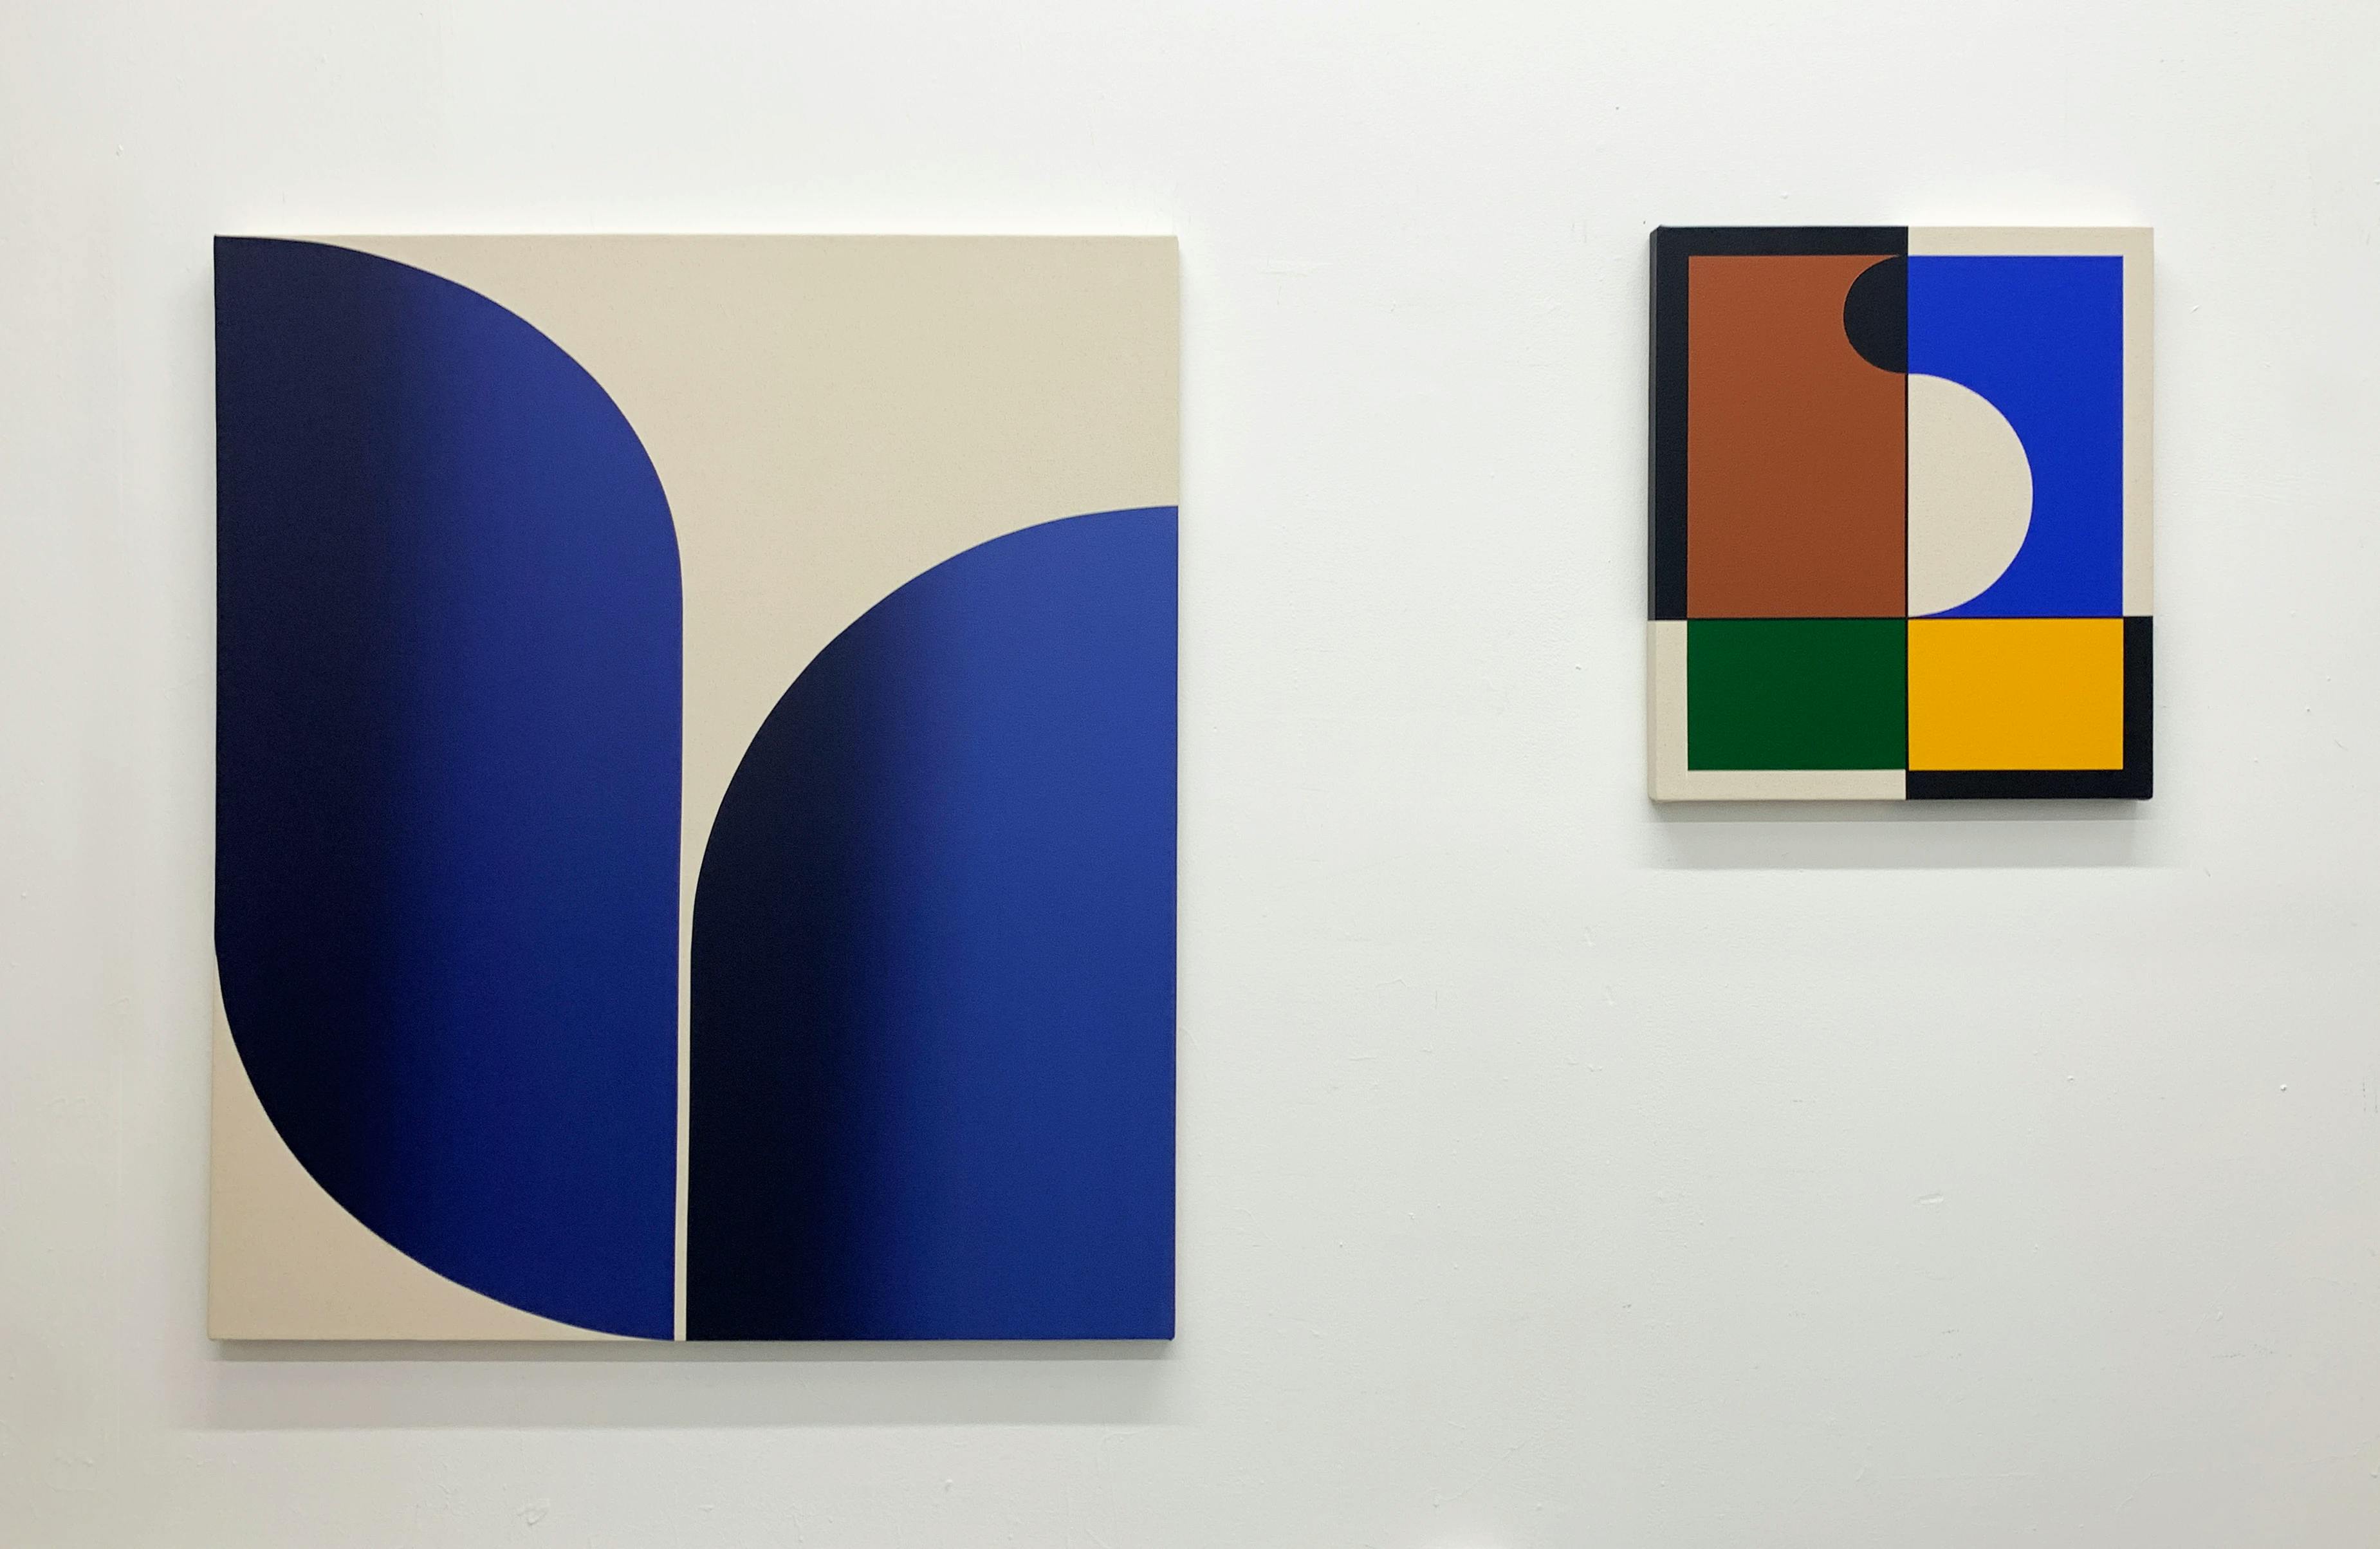 Two paintings, a minimalist blue painting and a small abstract one with geometric shapes, by artist Senem Oezdogan.